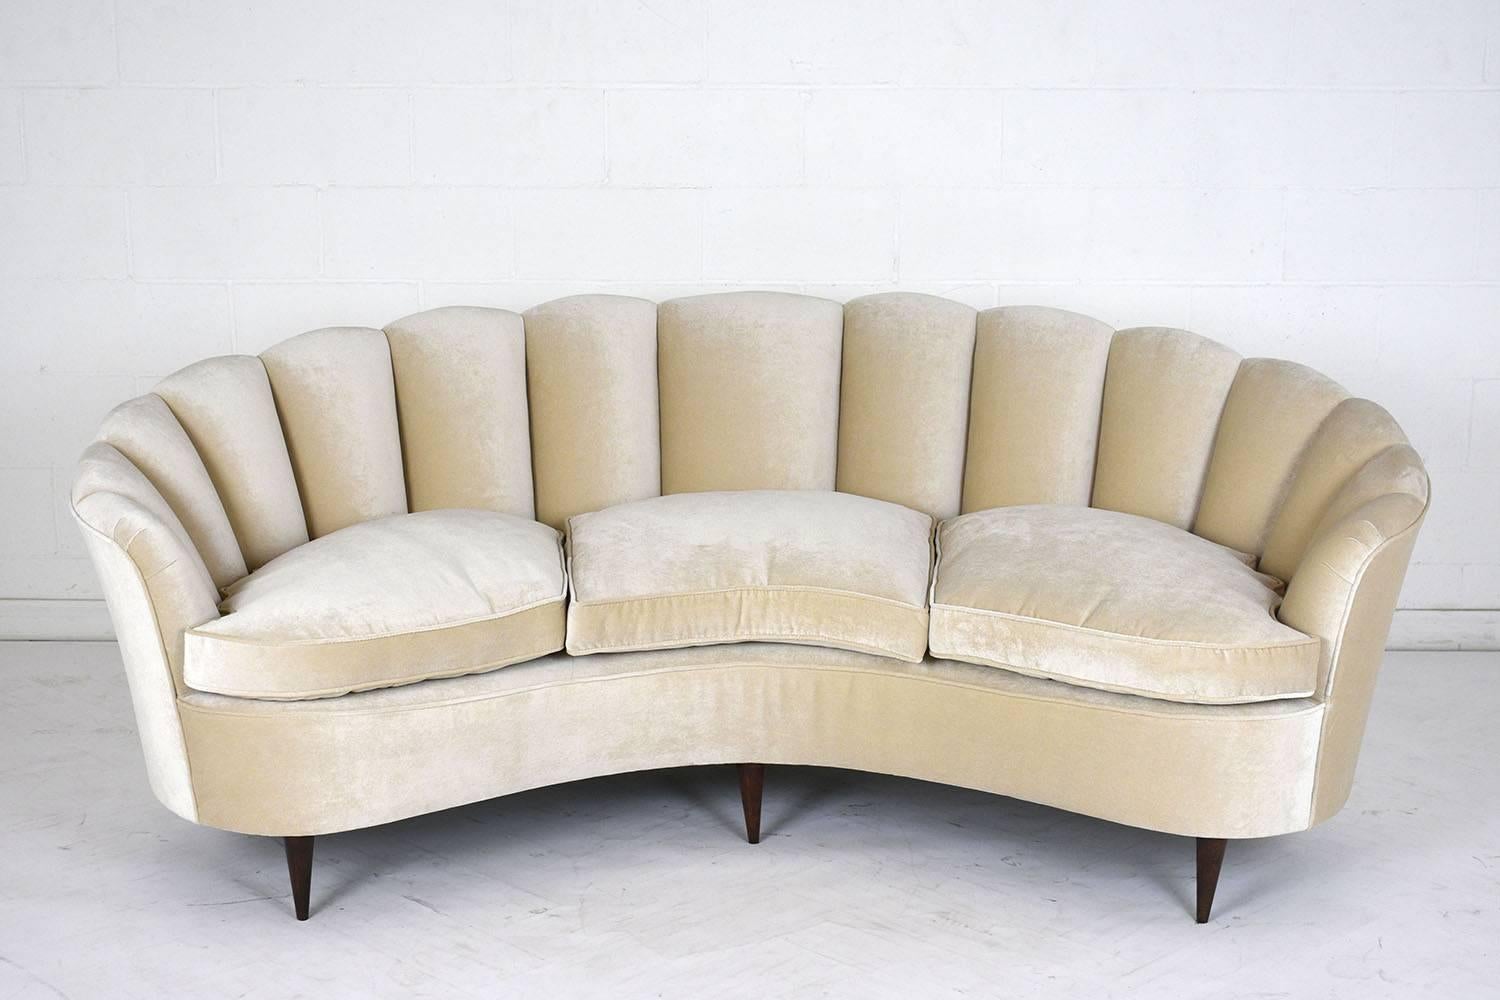 This 1930s Hollywood Regency-style sofa is made in the manner of Gio Ponti. This sofa has a curved frame and the back of the seat features a scalloped deign with different sized cushions and a curved front edge. The sofa has been completely restored